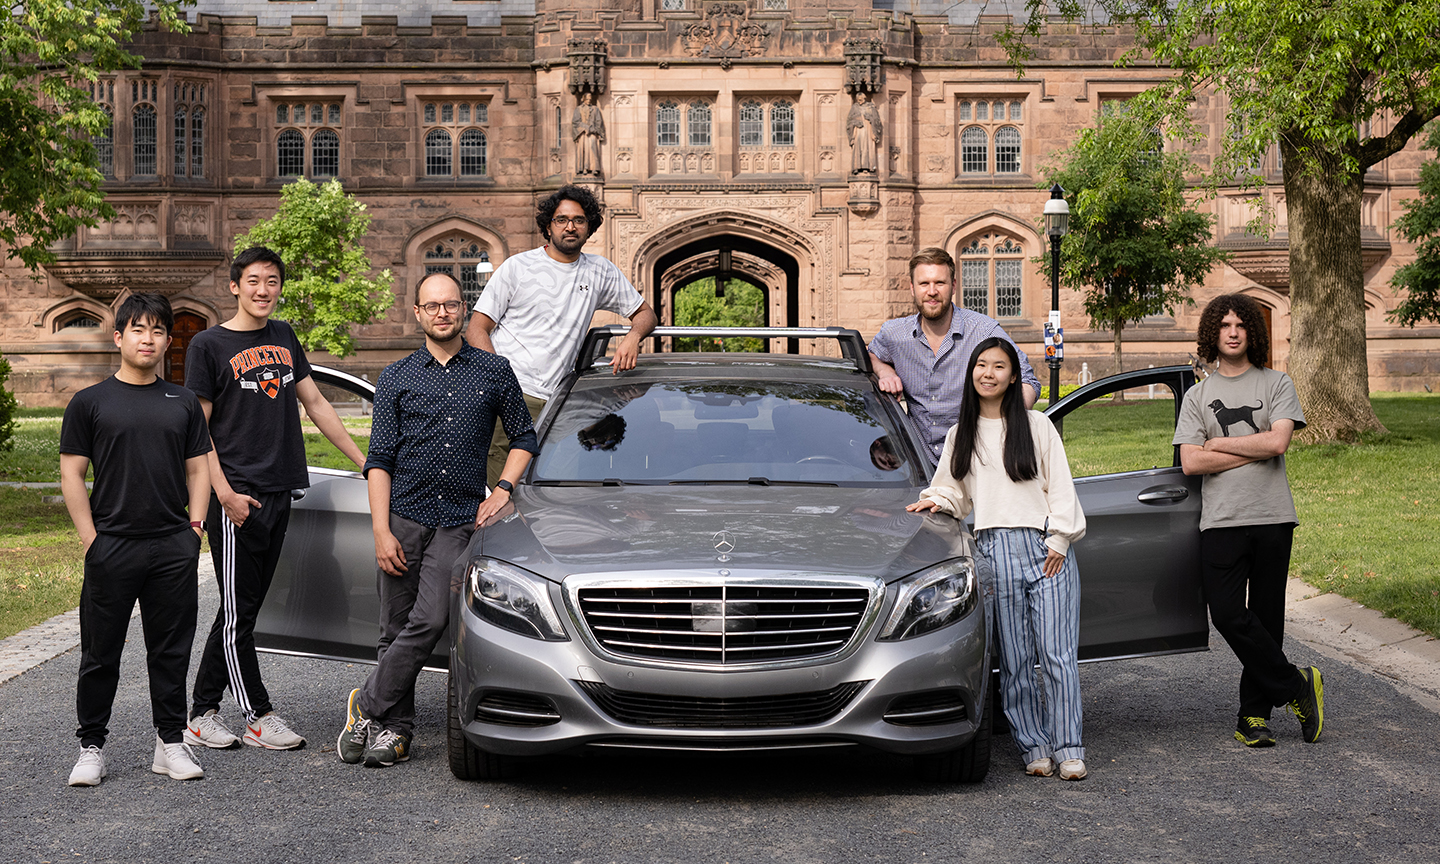 Heide's lab group standing outside on Princeton's campus posing with a test vehicle.  The car's doors are open and it's parked on a gravel road.